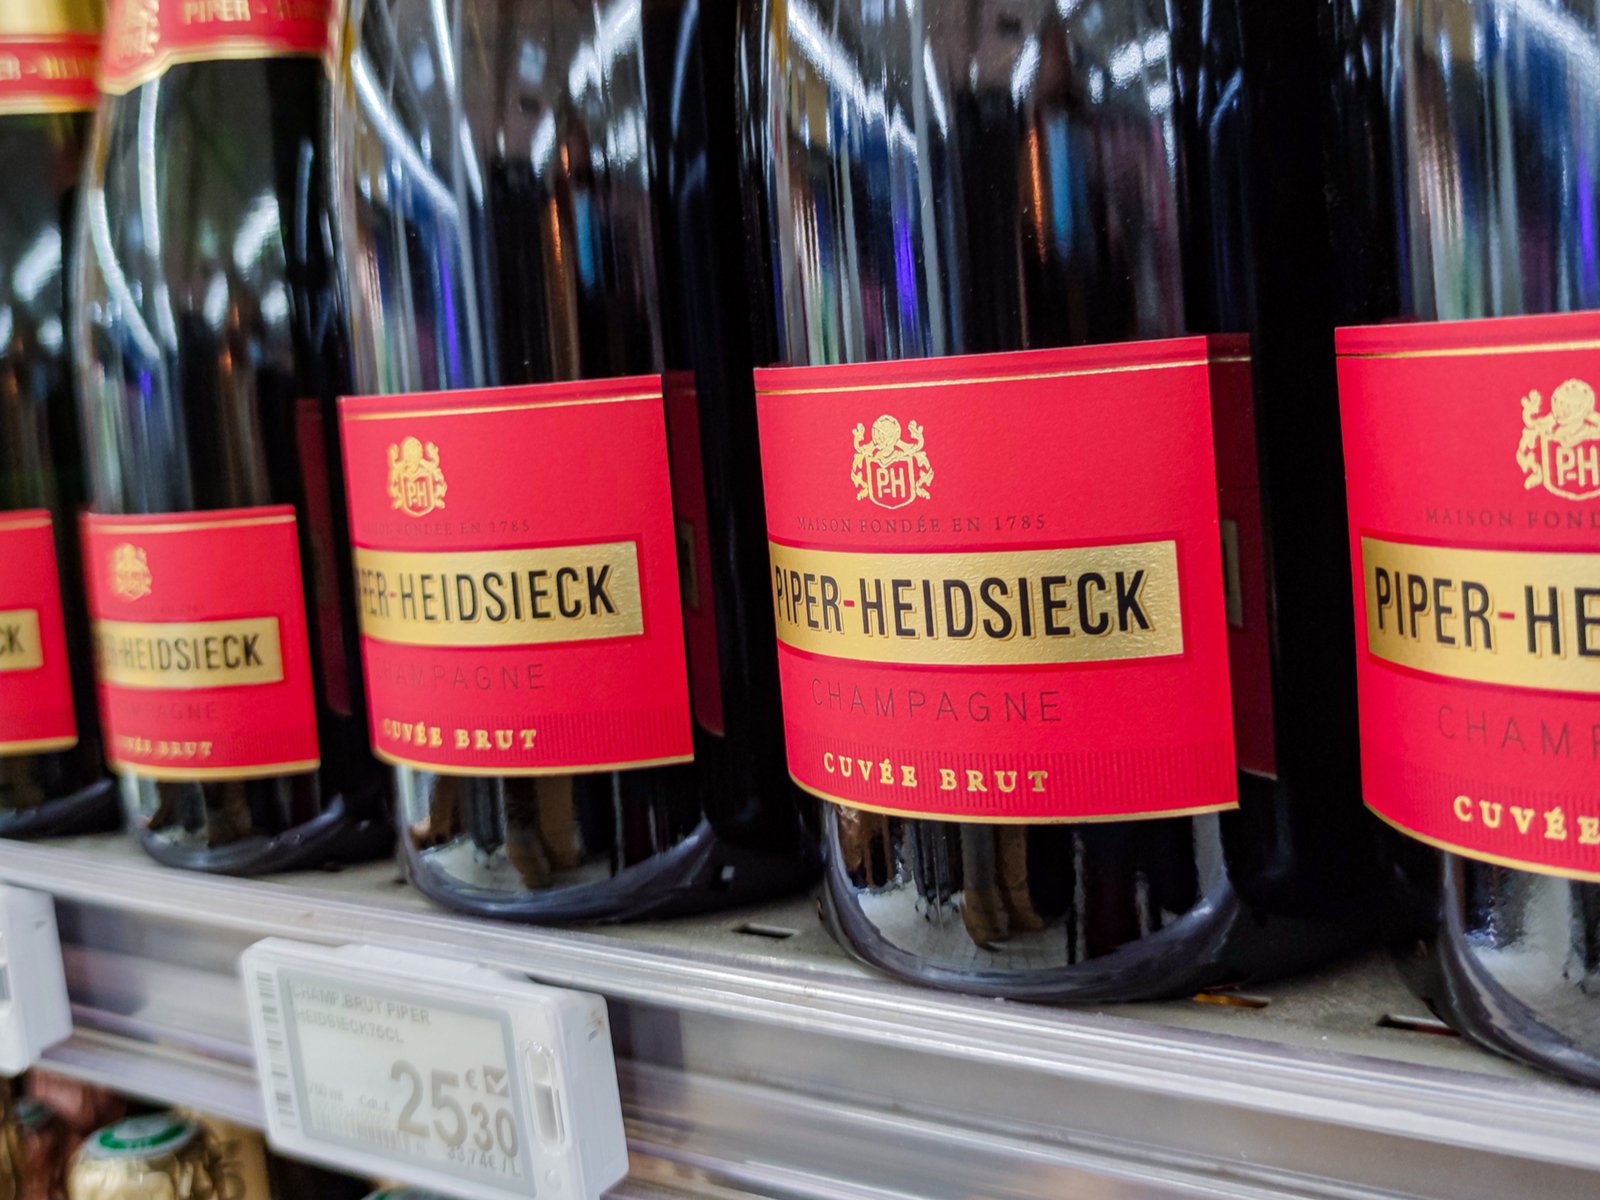 Piper-Heidsieck Champagne for sale in France.